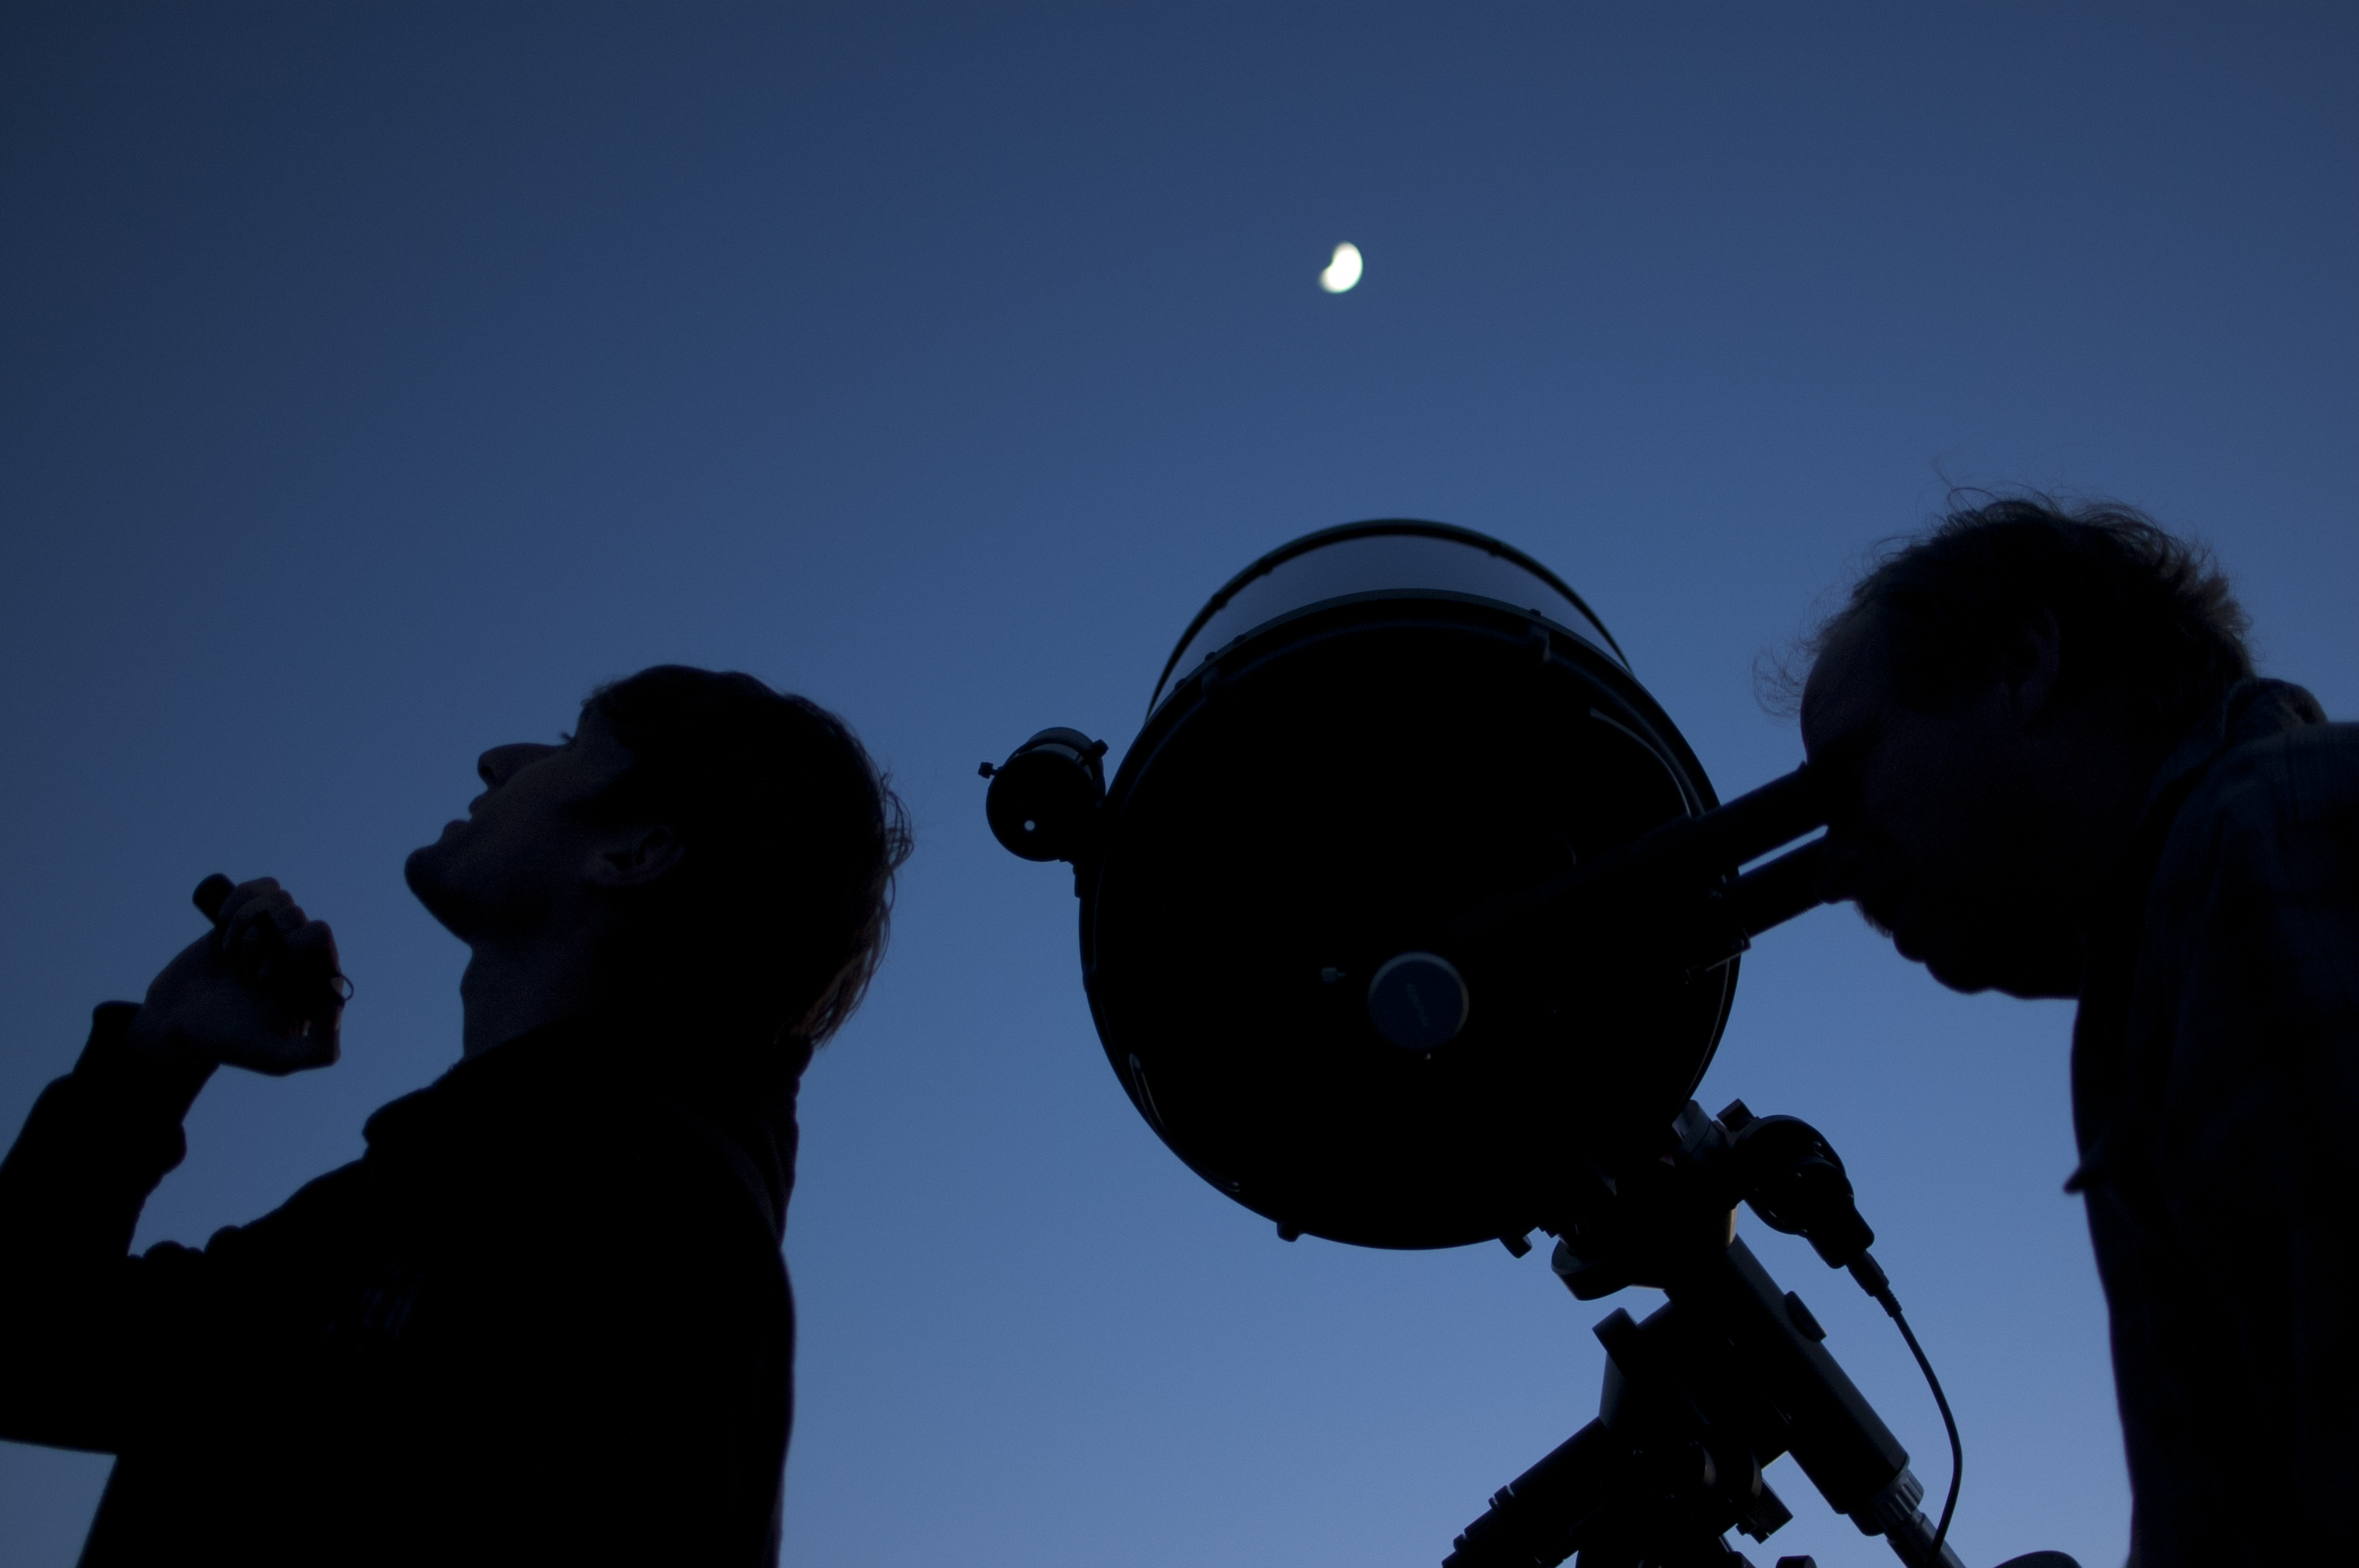 Grand Canyon National Park to host annual star party picture